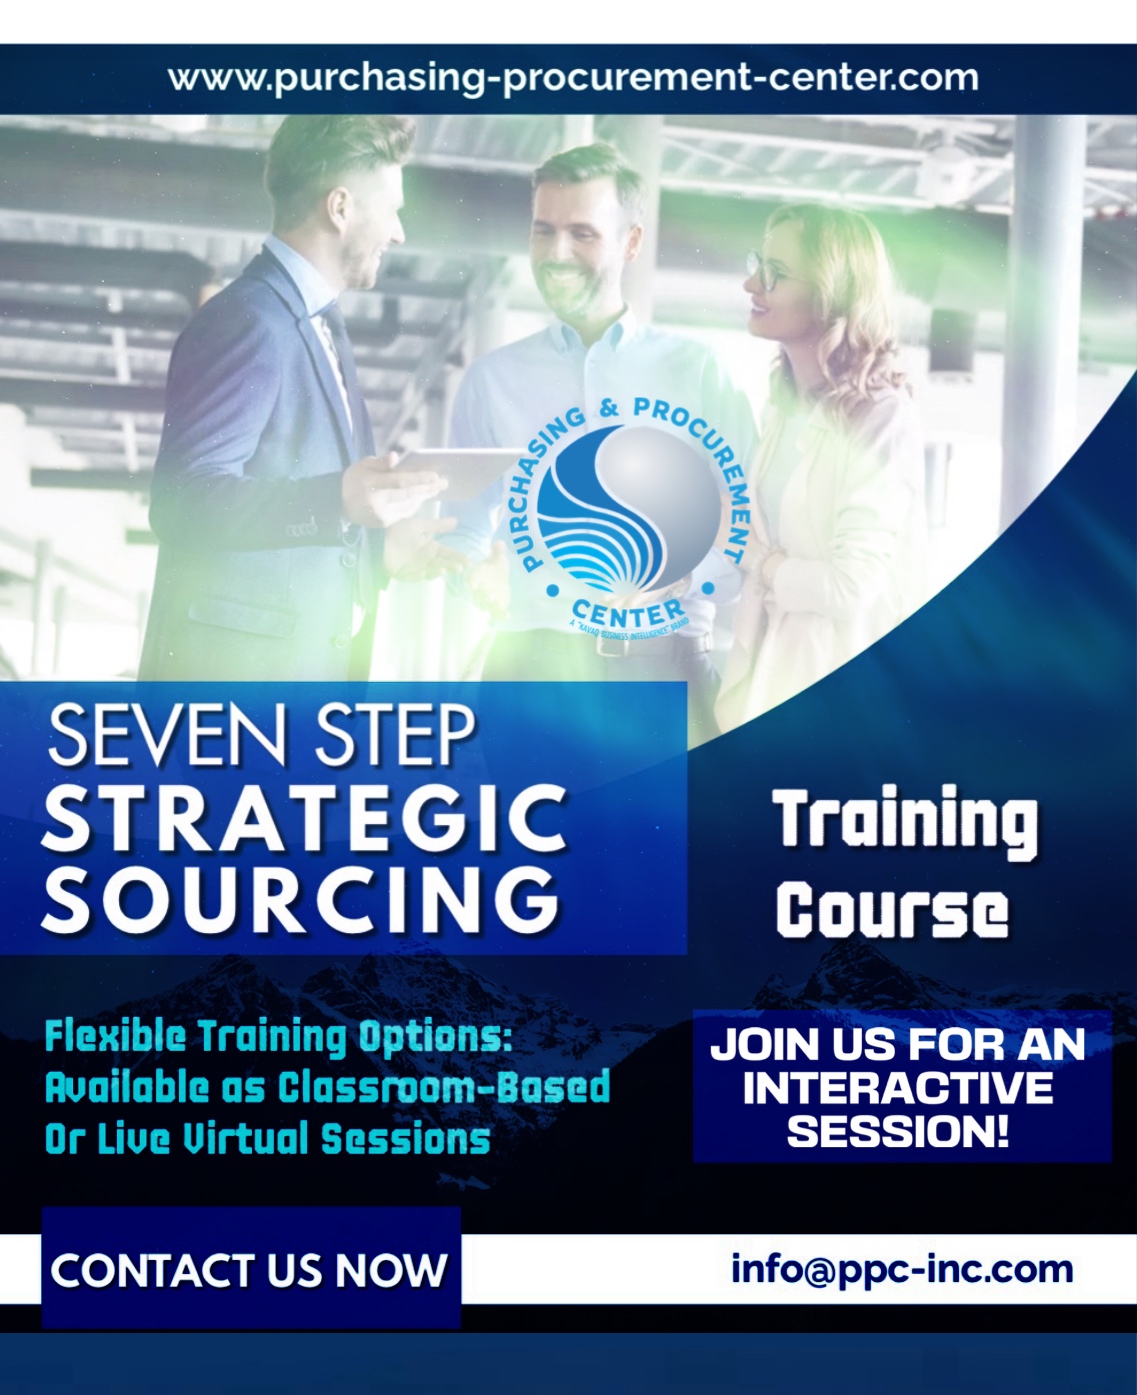 Join this strategic sourcing training to master procurement skills. Learn from experts, boost efficiency, and drive business success. Enroll now!